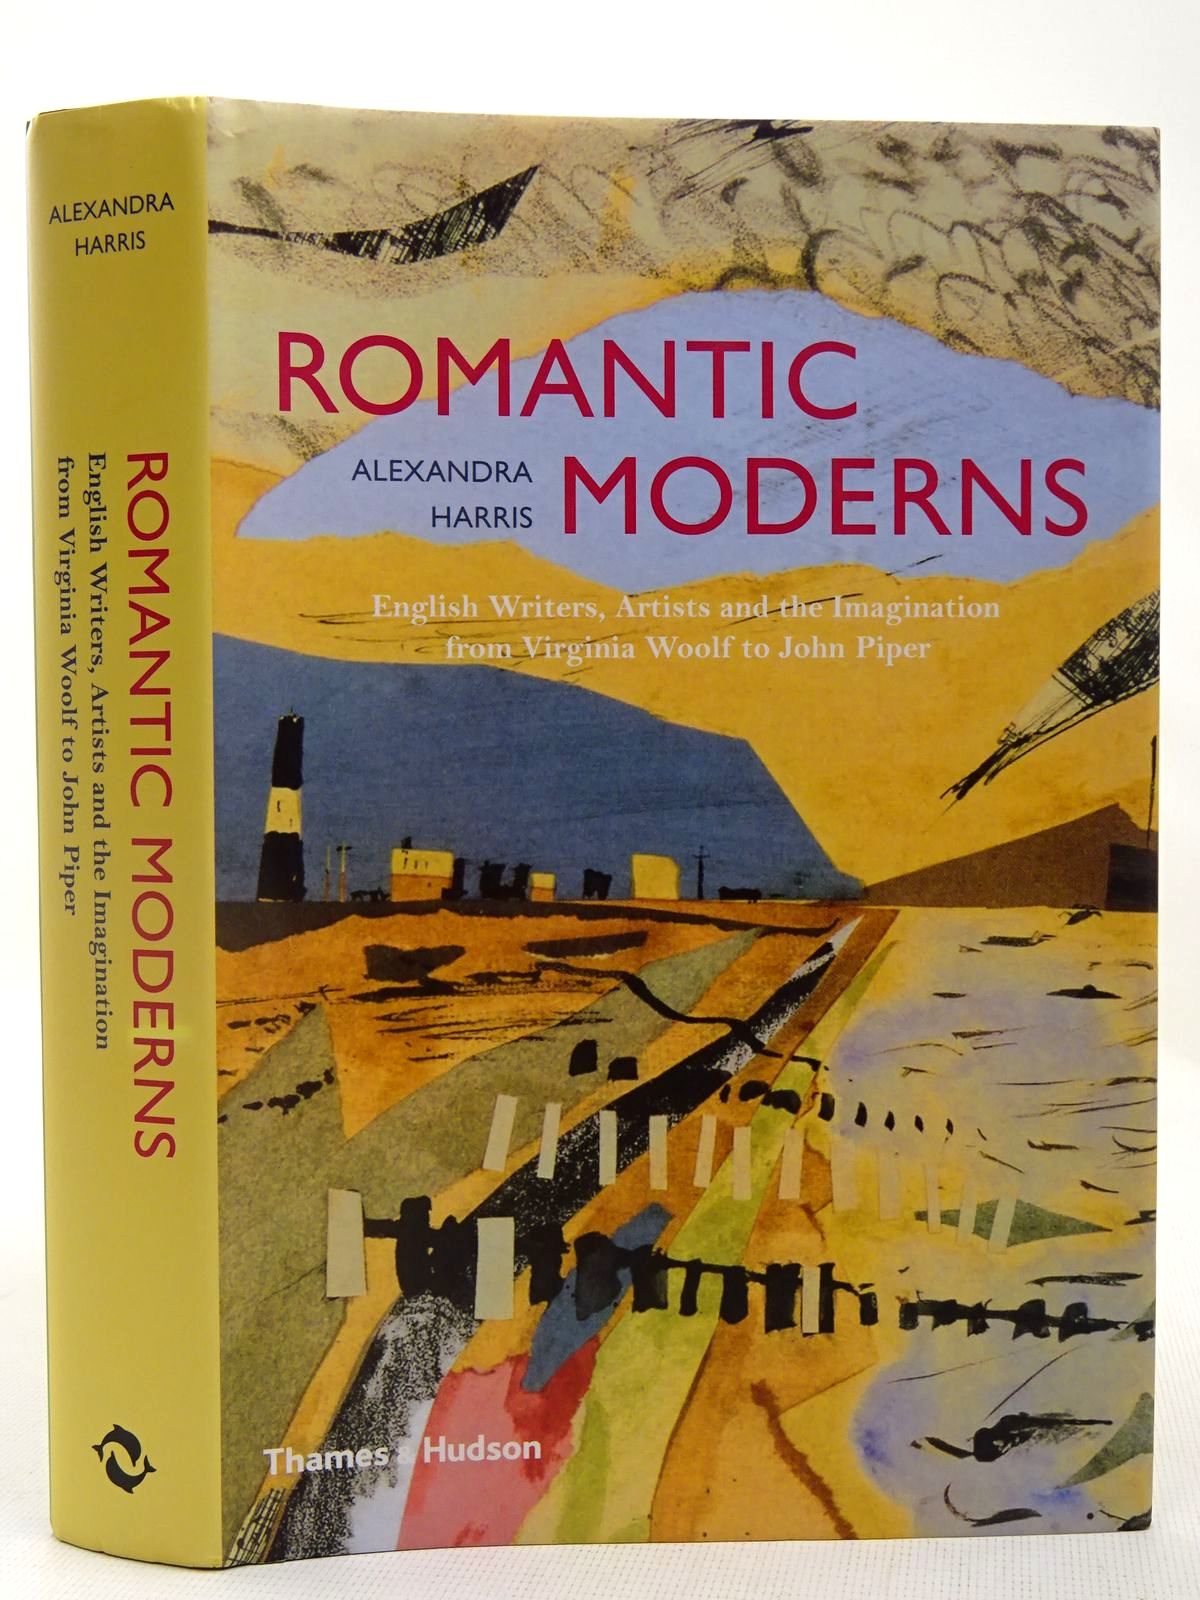 Photo of ROMANTIC MODERNS written by Harris, Alexandra illustrated by Bawden, Edward
Kauffer, E. Mcknight
et al., published by Thames and Hudson (STOCK CODE: 2127856)  for sale by Stella & Rose's Books